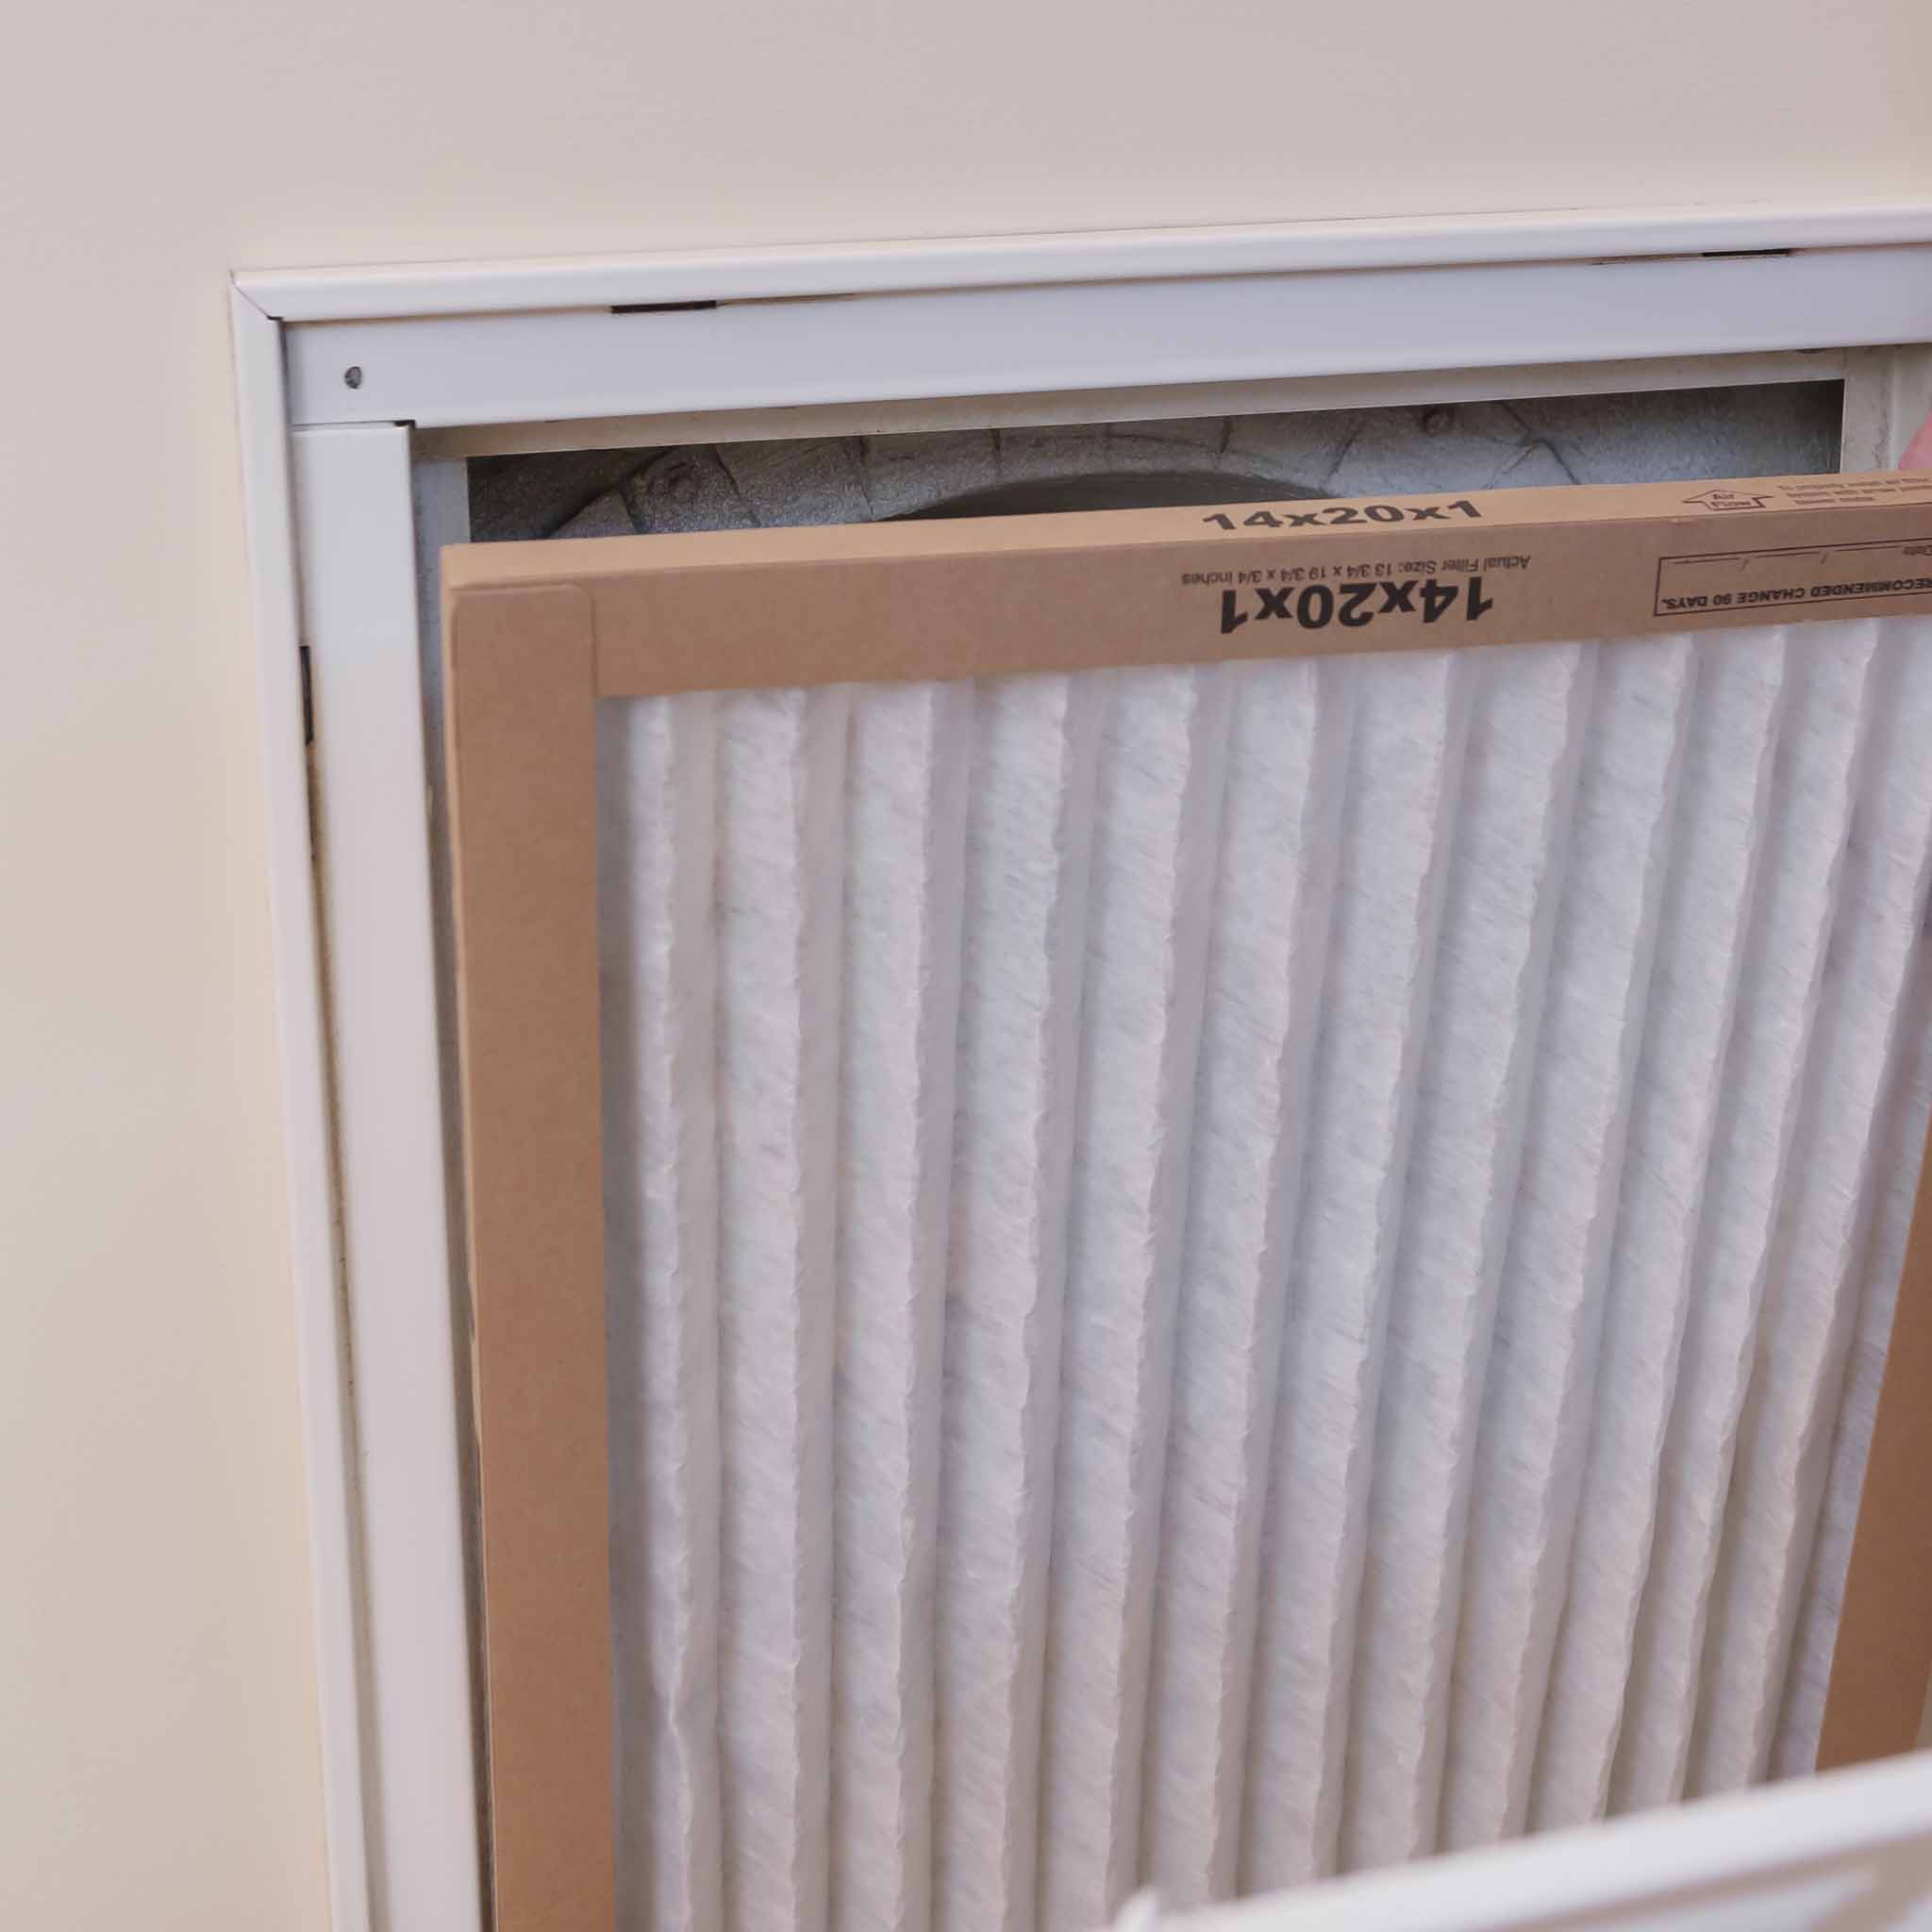 Custom AC Filters - A/C Filters Made Just For You!